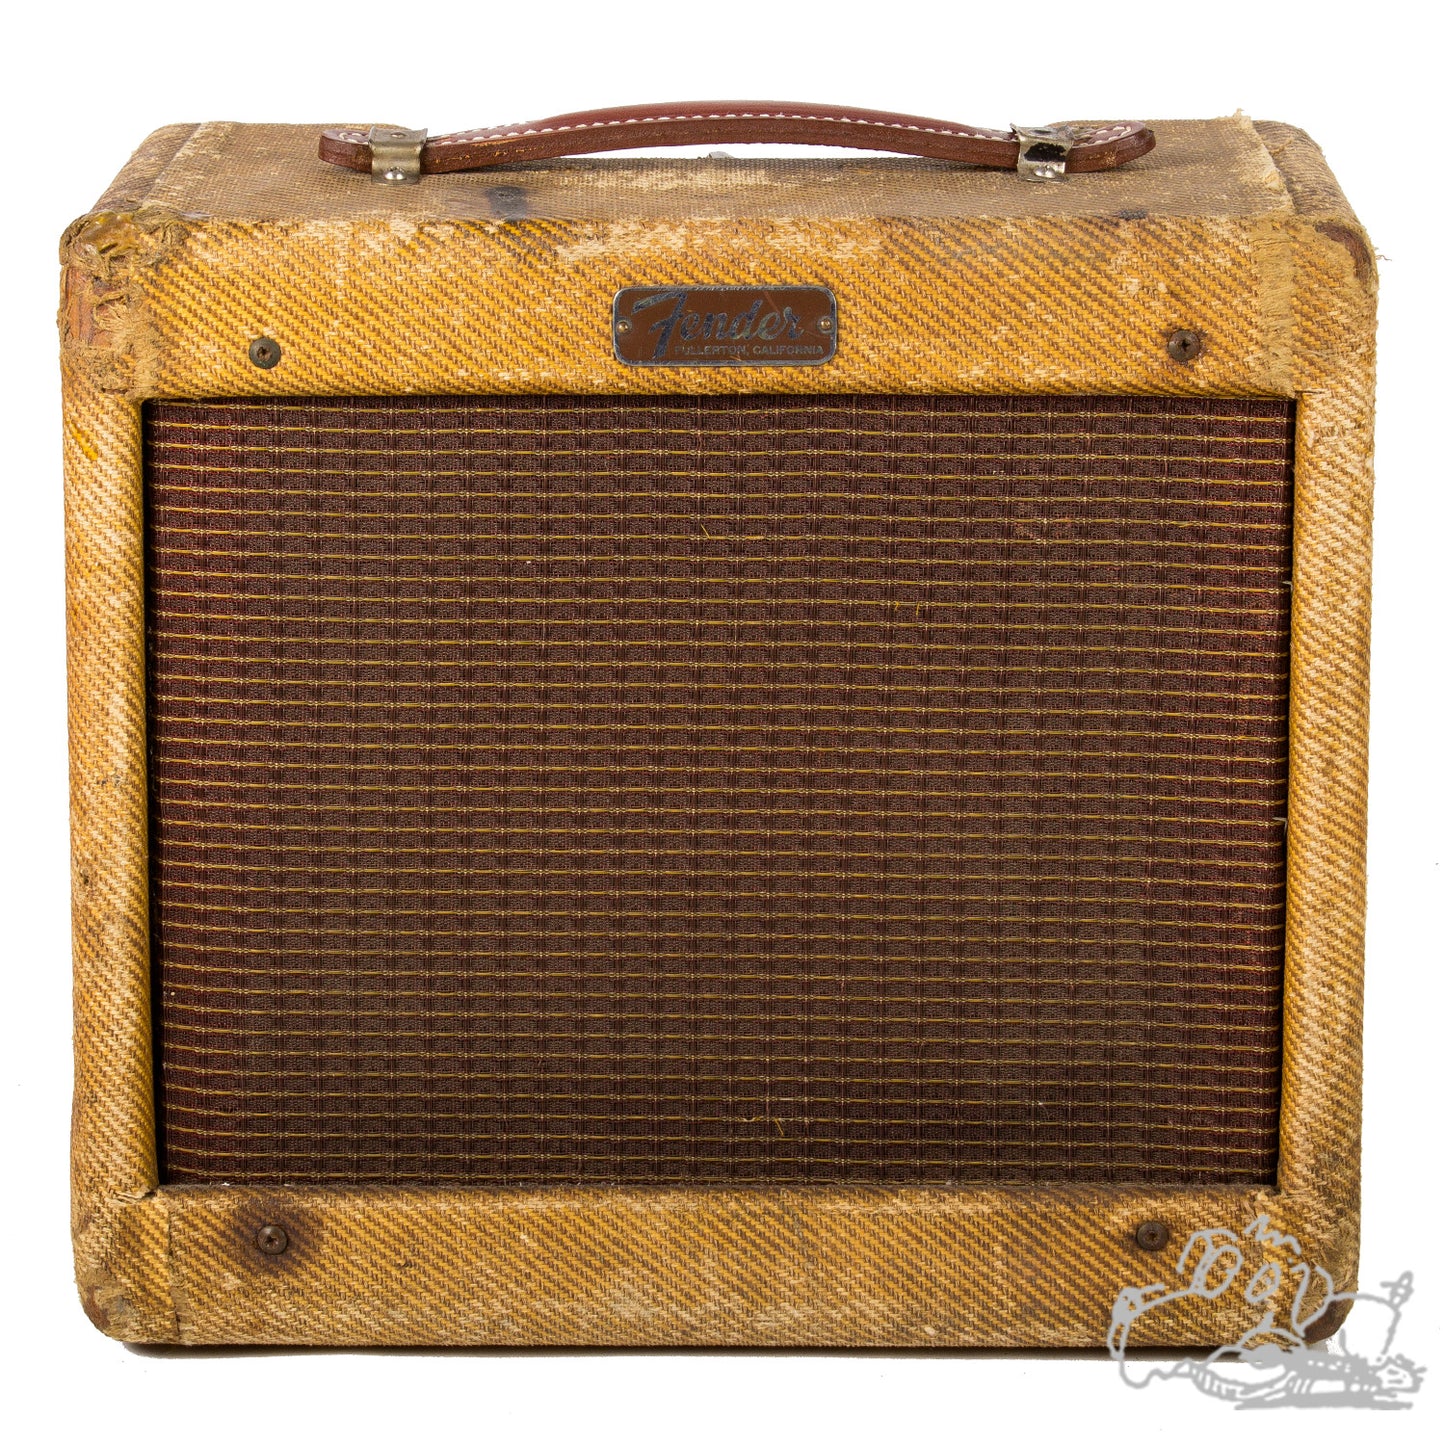 1958 Fender Champ With Changed Speaker